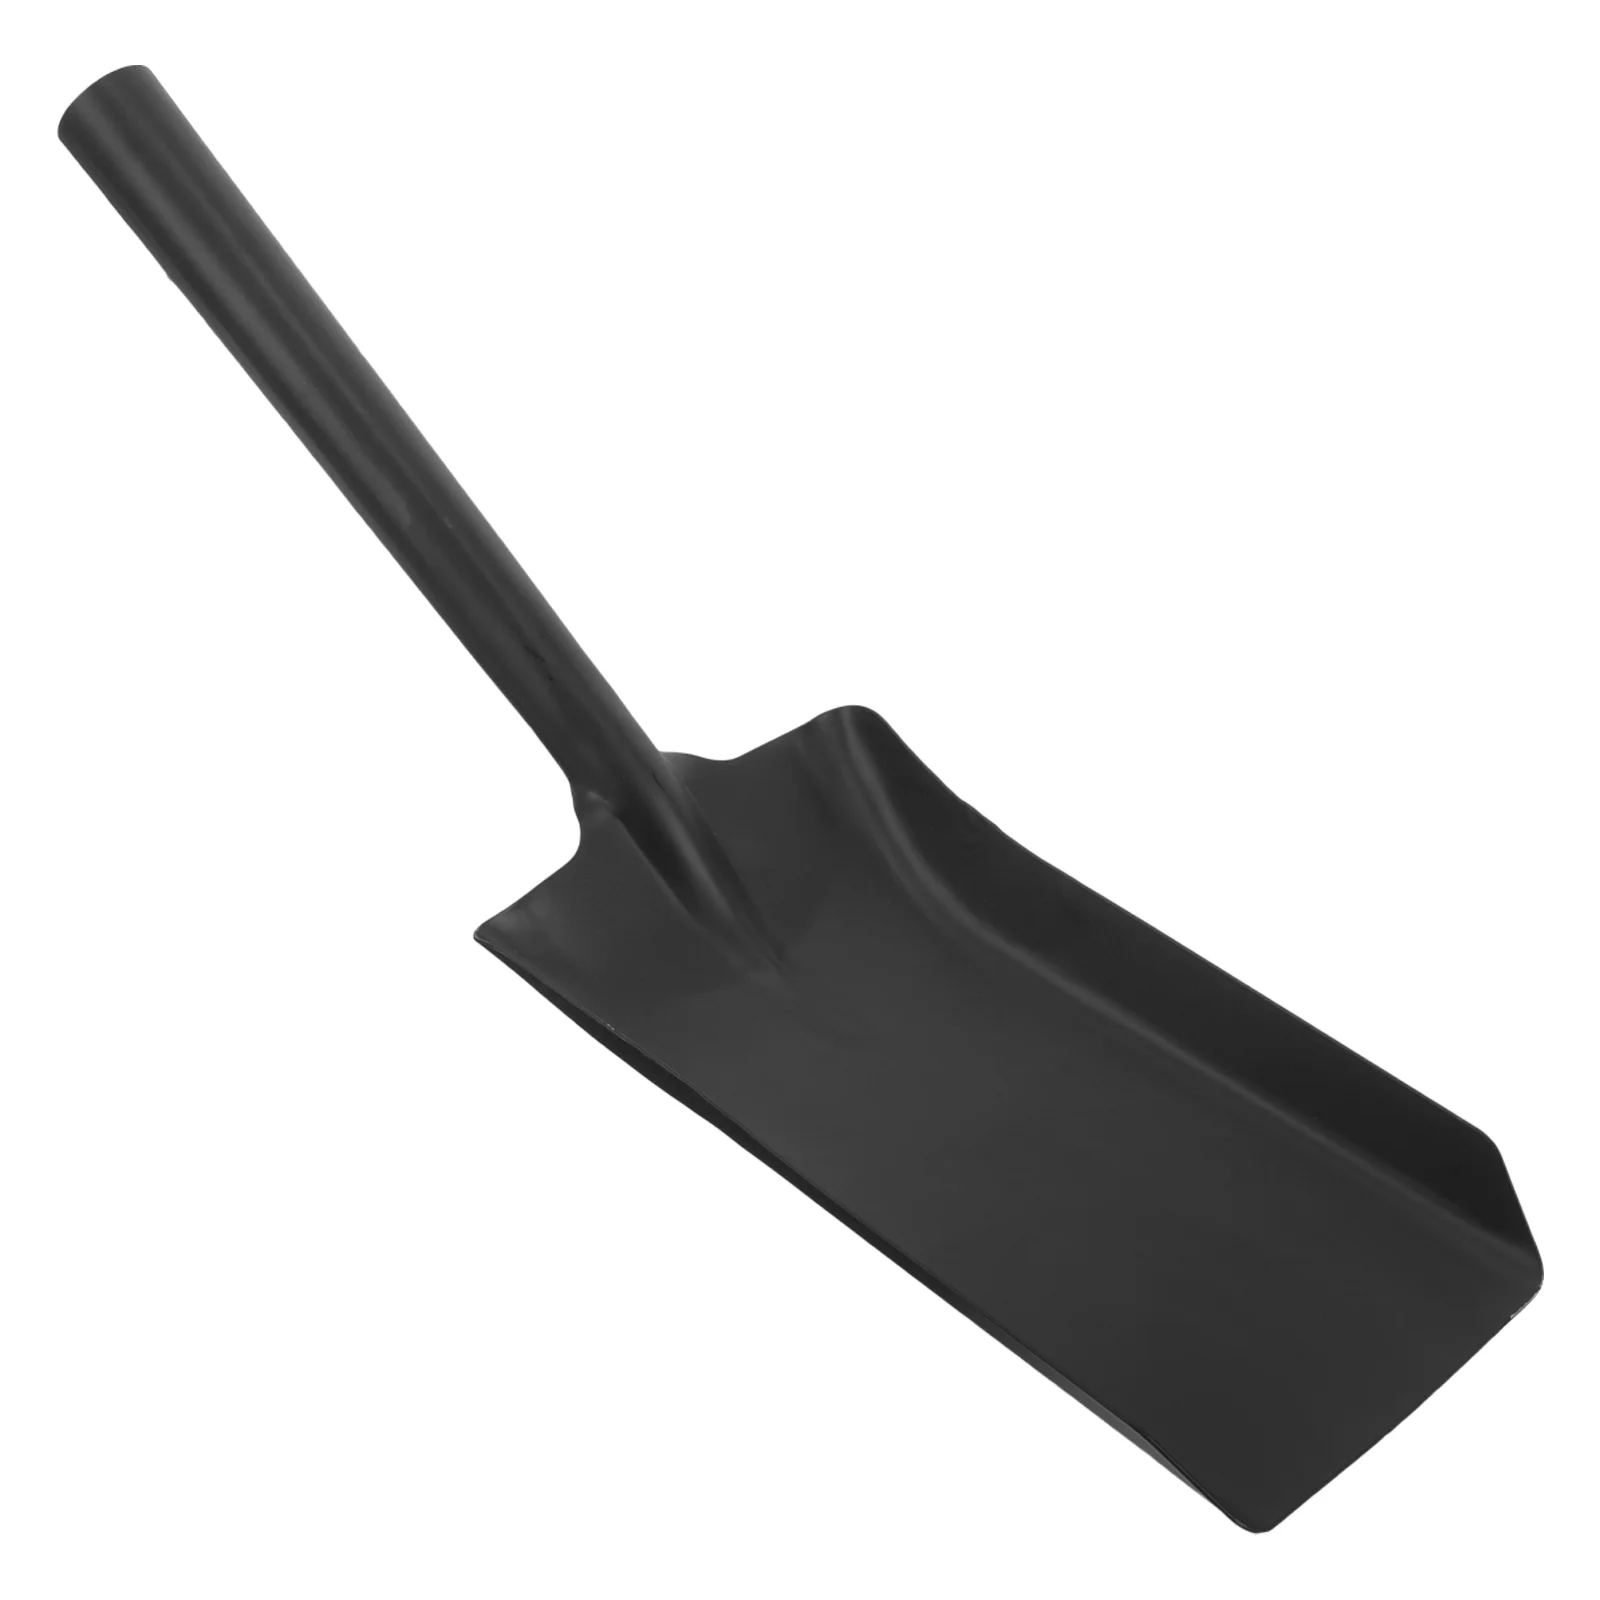 

Charcoal Soot Fireplace Pit Household Bbq Ash Cleaning Dustpan Flat Stainless Steel for Stove Kitchen Shovels Scoop